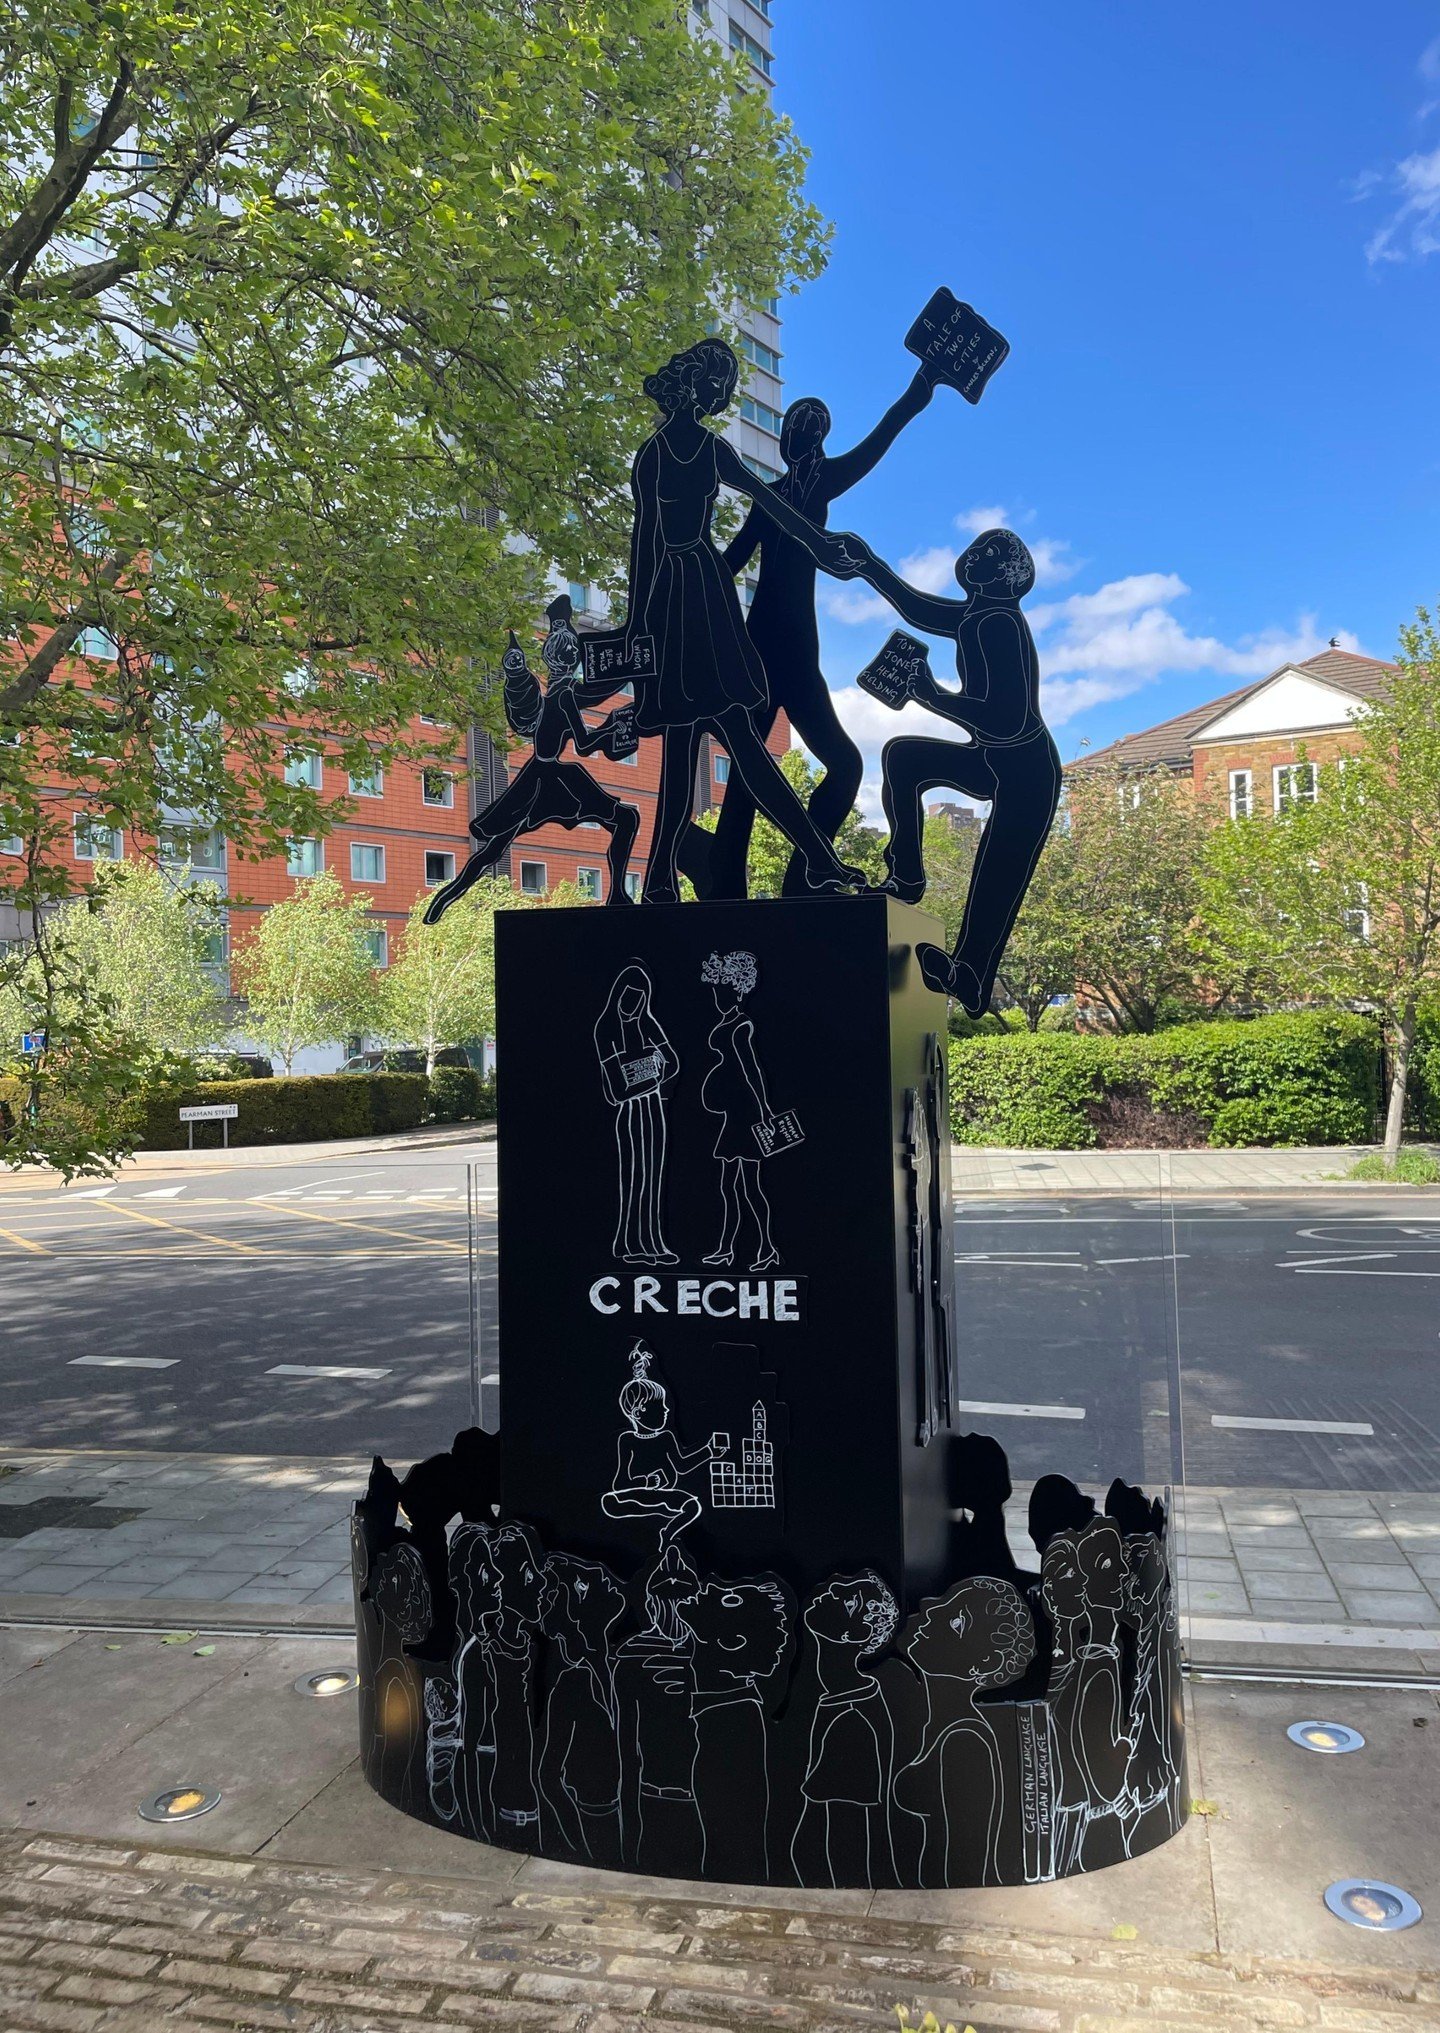 Morley College Waterloo is delighted to announce the installation of our new Fifth Plinth sculpture by long-standing Morley artist Patsy Hickman. Selected by an expert panel and developed over the last year, the sculpture is entitled Renewal, and is 